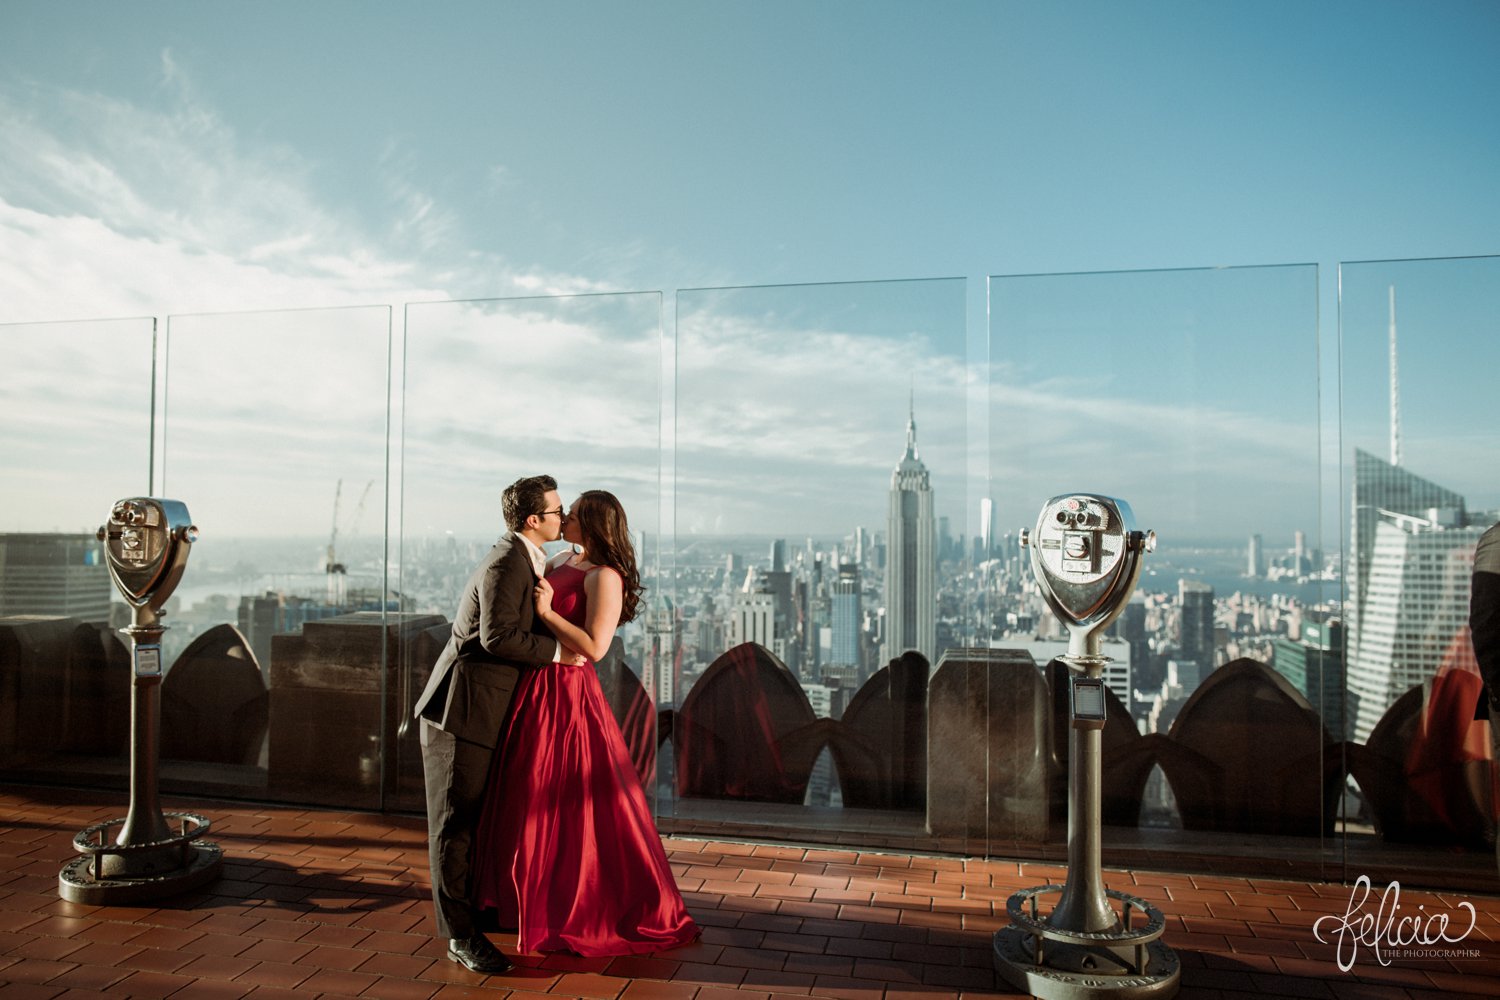 images by feliciathephotographer.com | destination wedding photographer | engagement | new york city | skyline | downtown | urban | formal | classic | elegant | long red gown | suit and tie | top of the rock | sunrise | elegant | glam | kiss | 